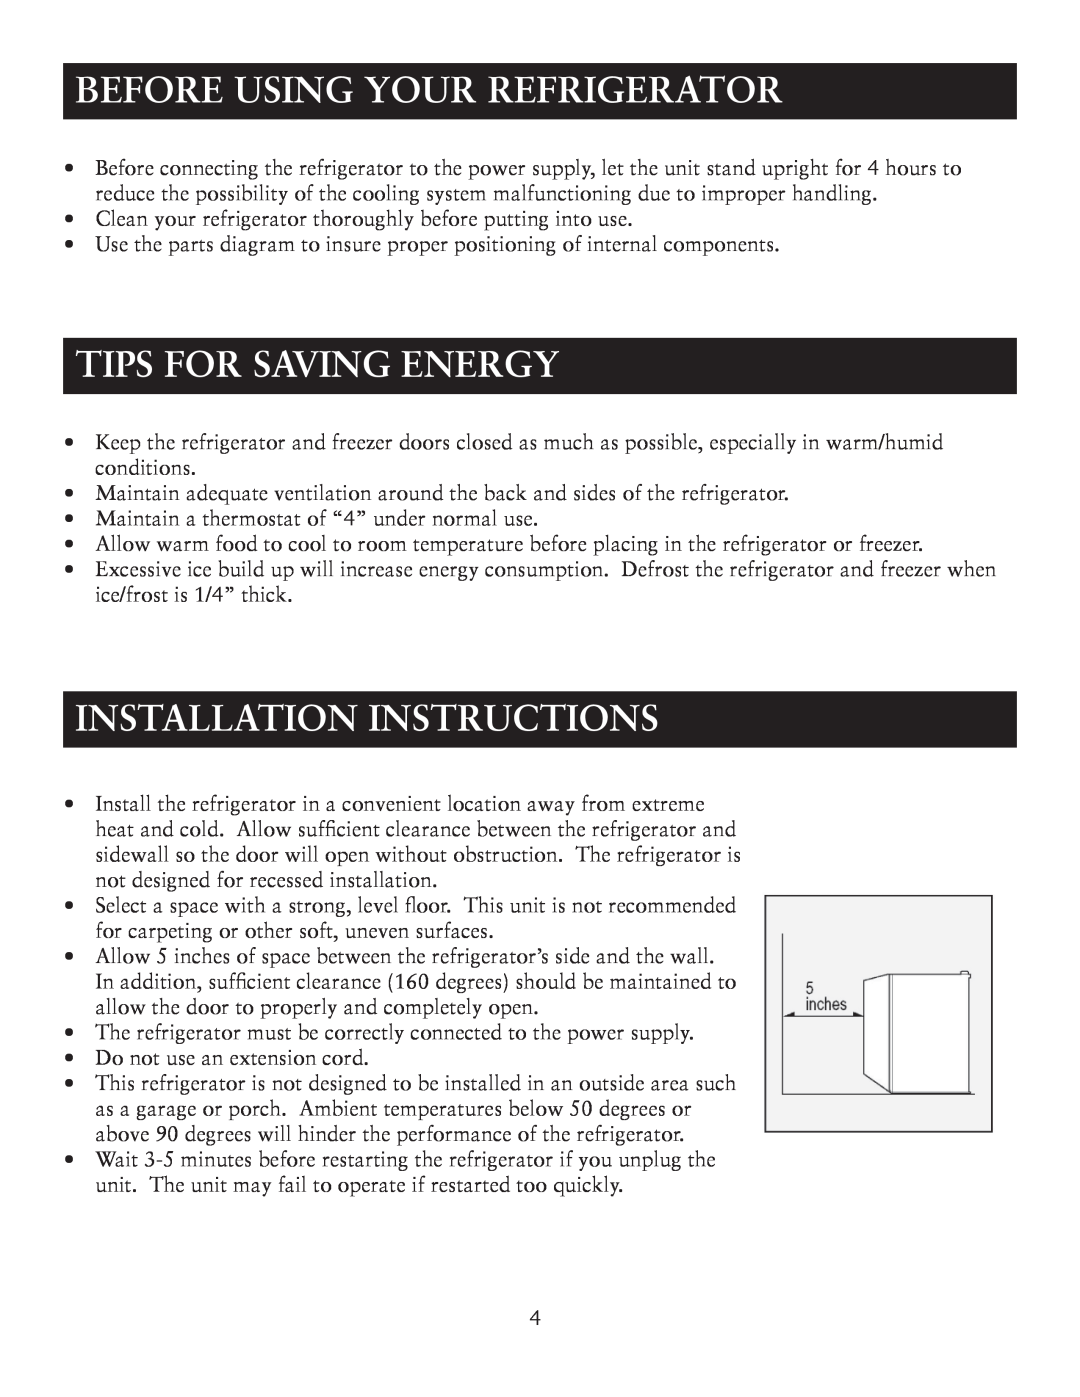 Oster OR03SCGBS user manual Before Using Your Refrigerator, Tips For Saving Energy, Installation Instructions 